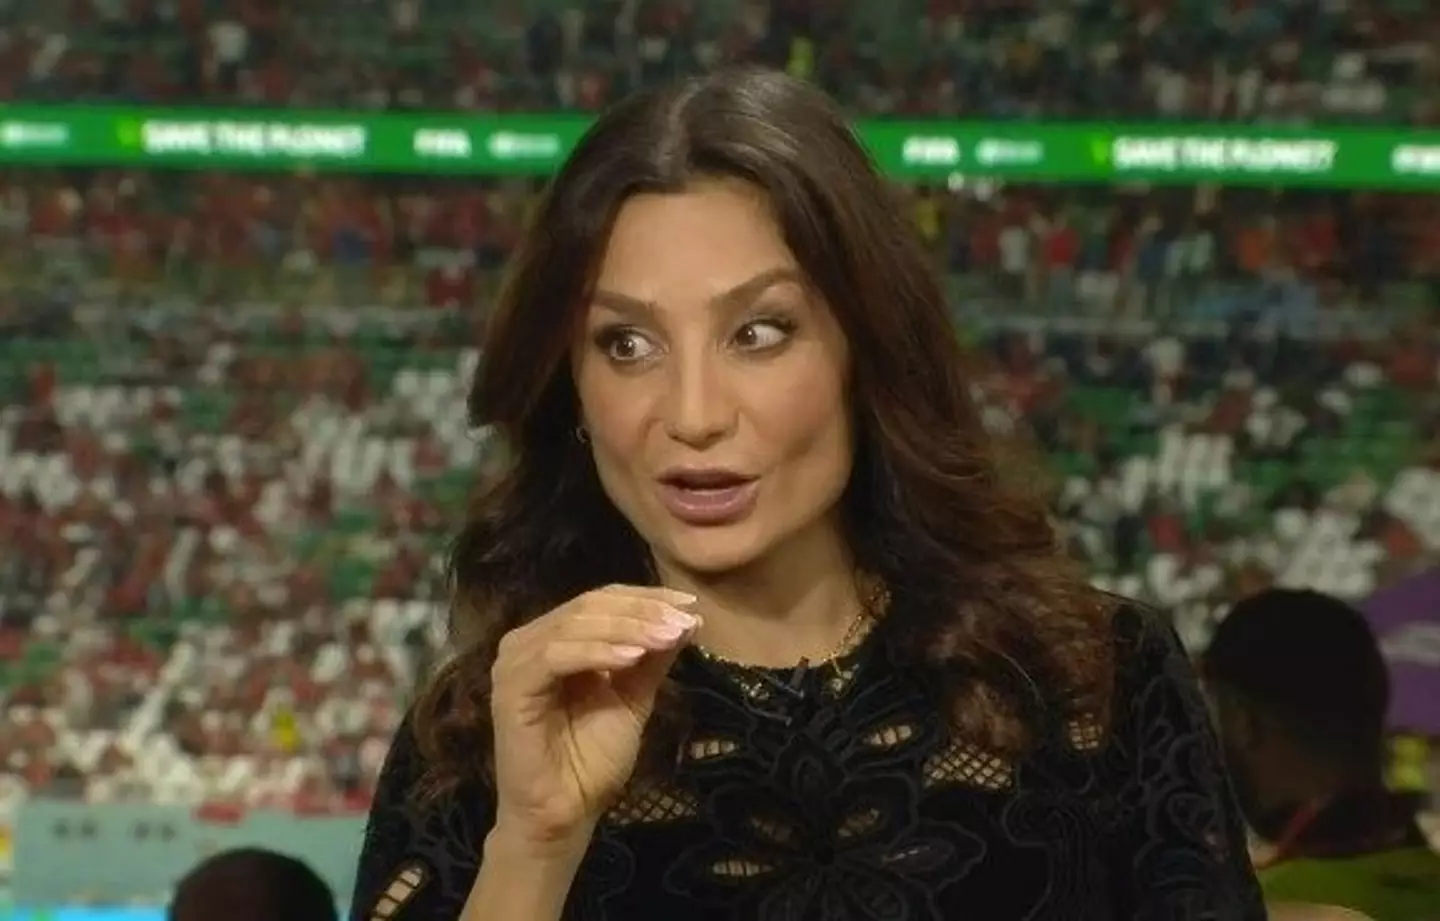 Nadia Nadim is part of ITV's World Cup coverage in Qatar.